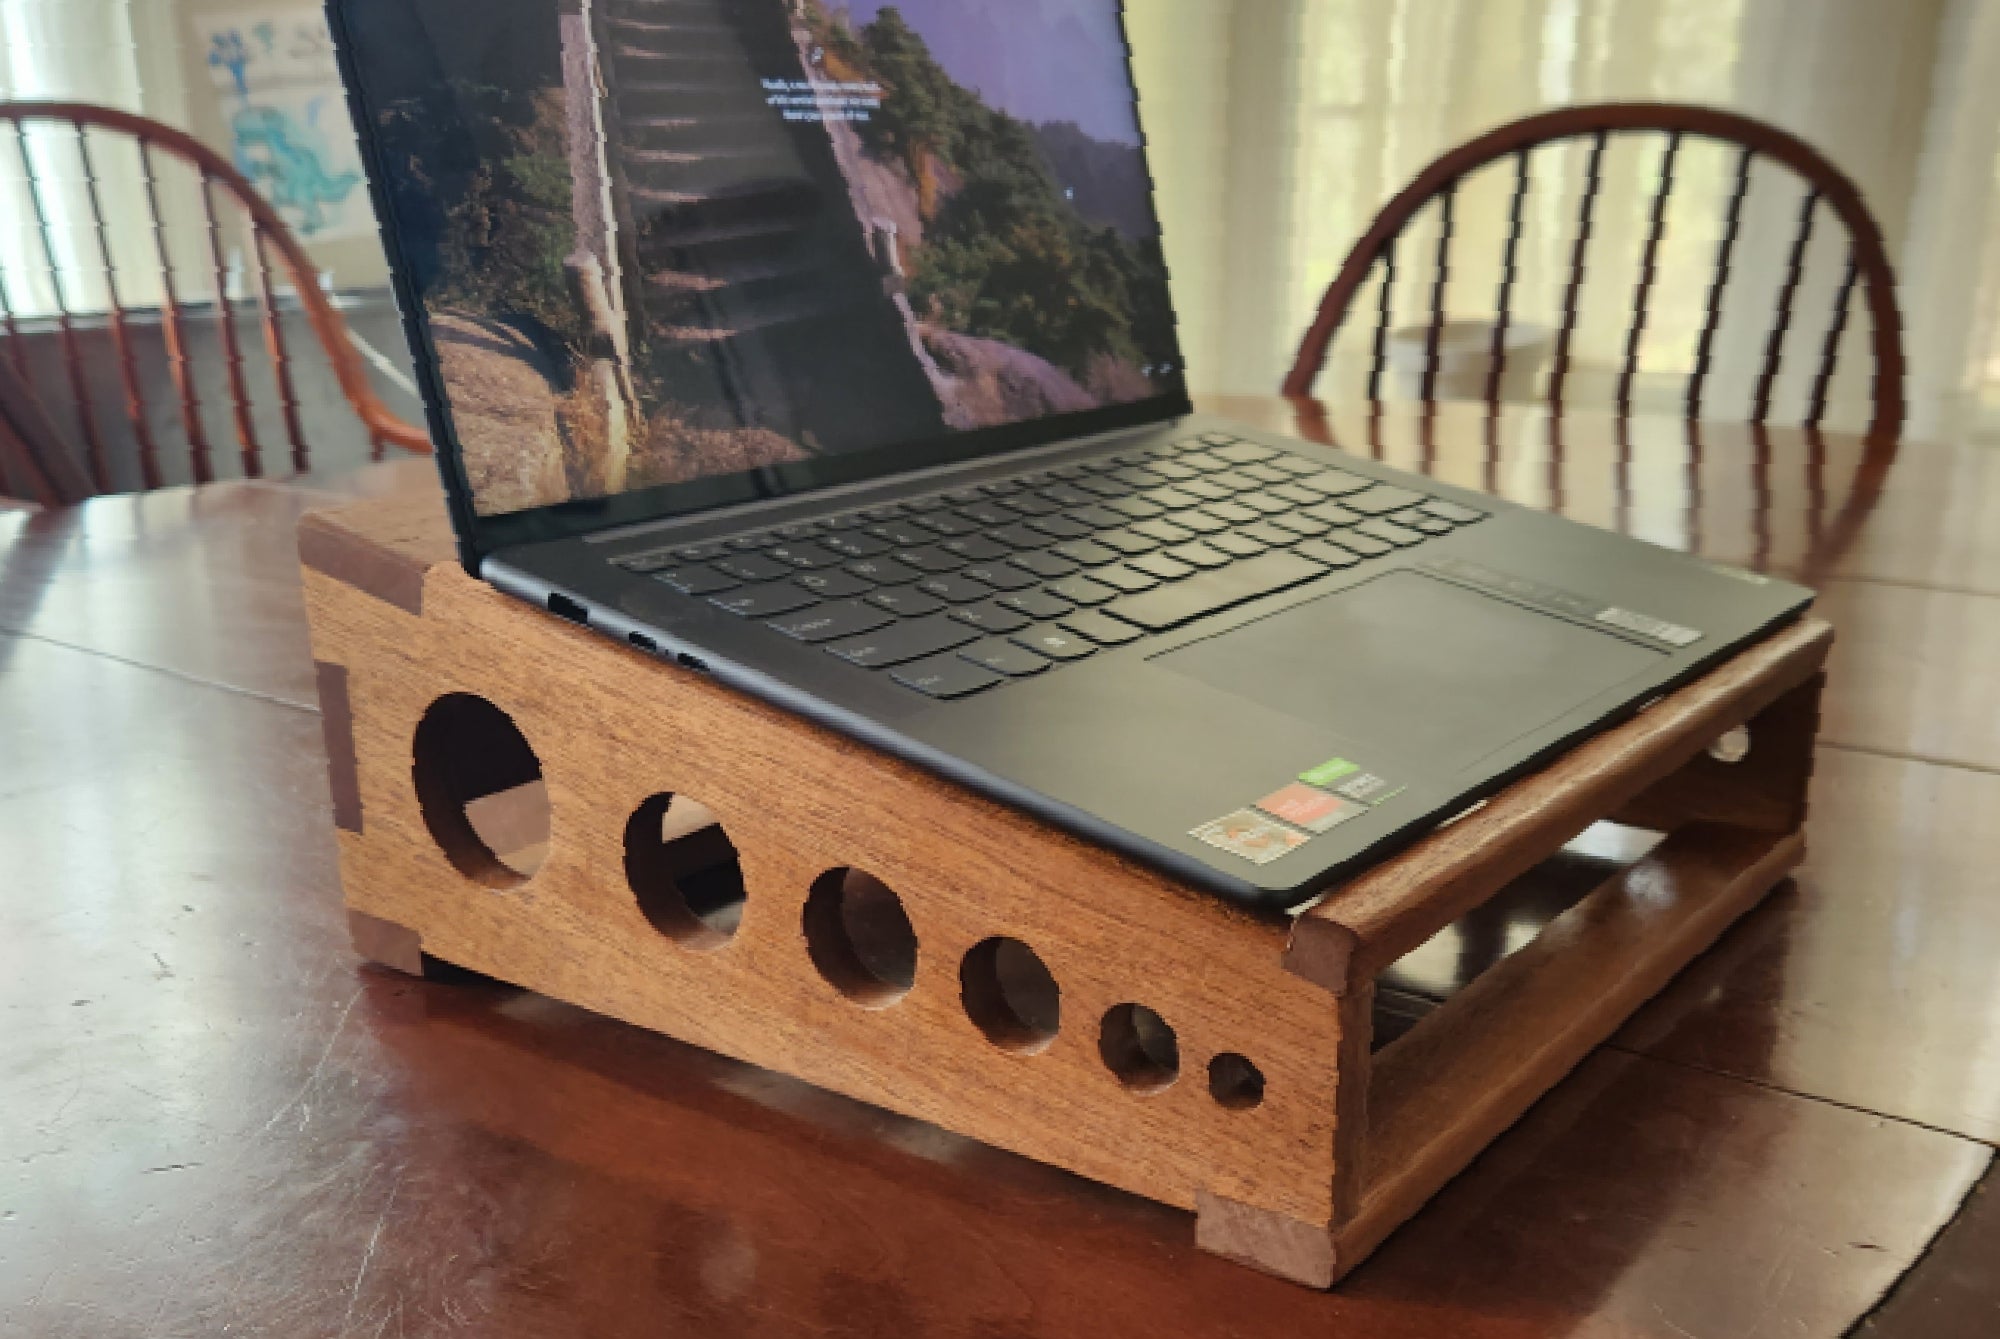 A DIY wooden laptop stand on a wooden table in a dining room, with a laptop on it. The rabbet joints in the side panels are visible.